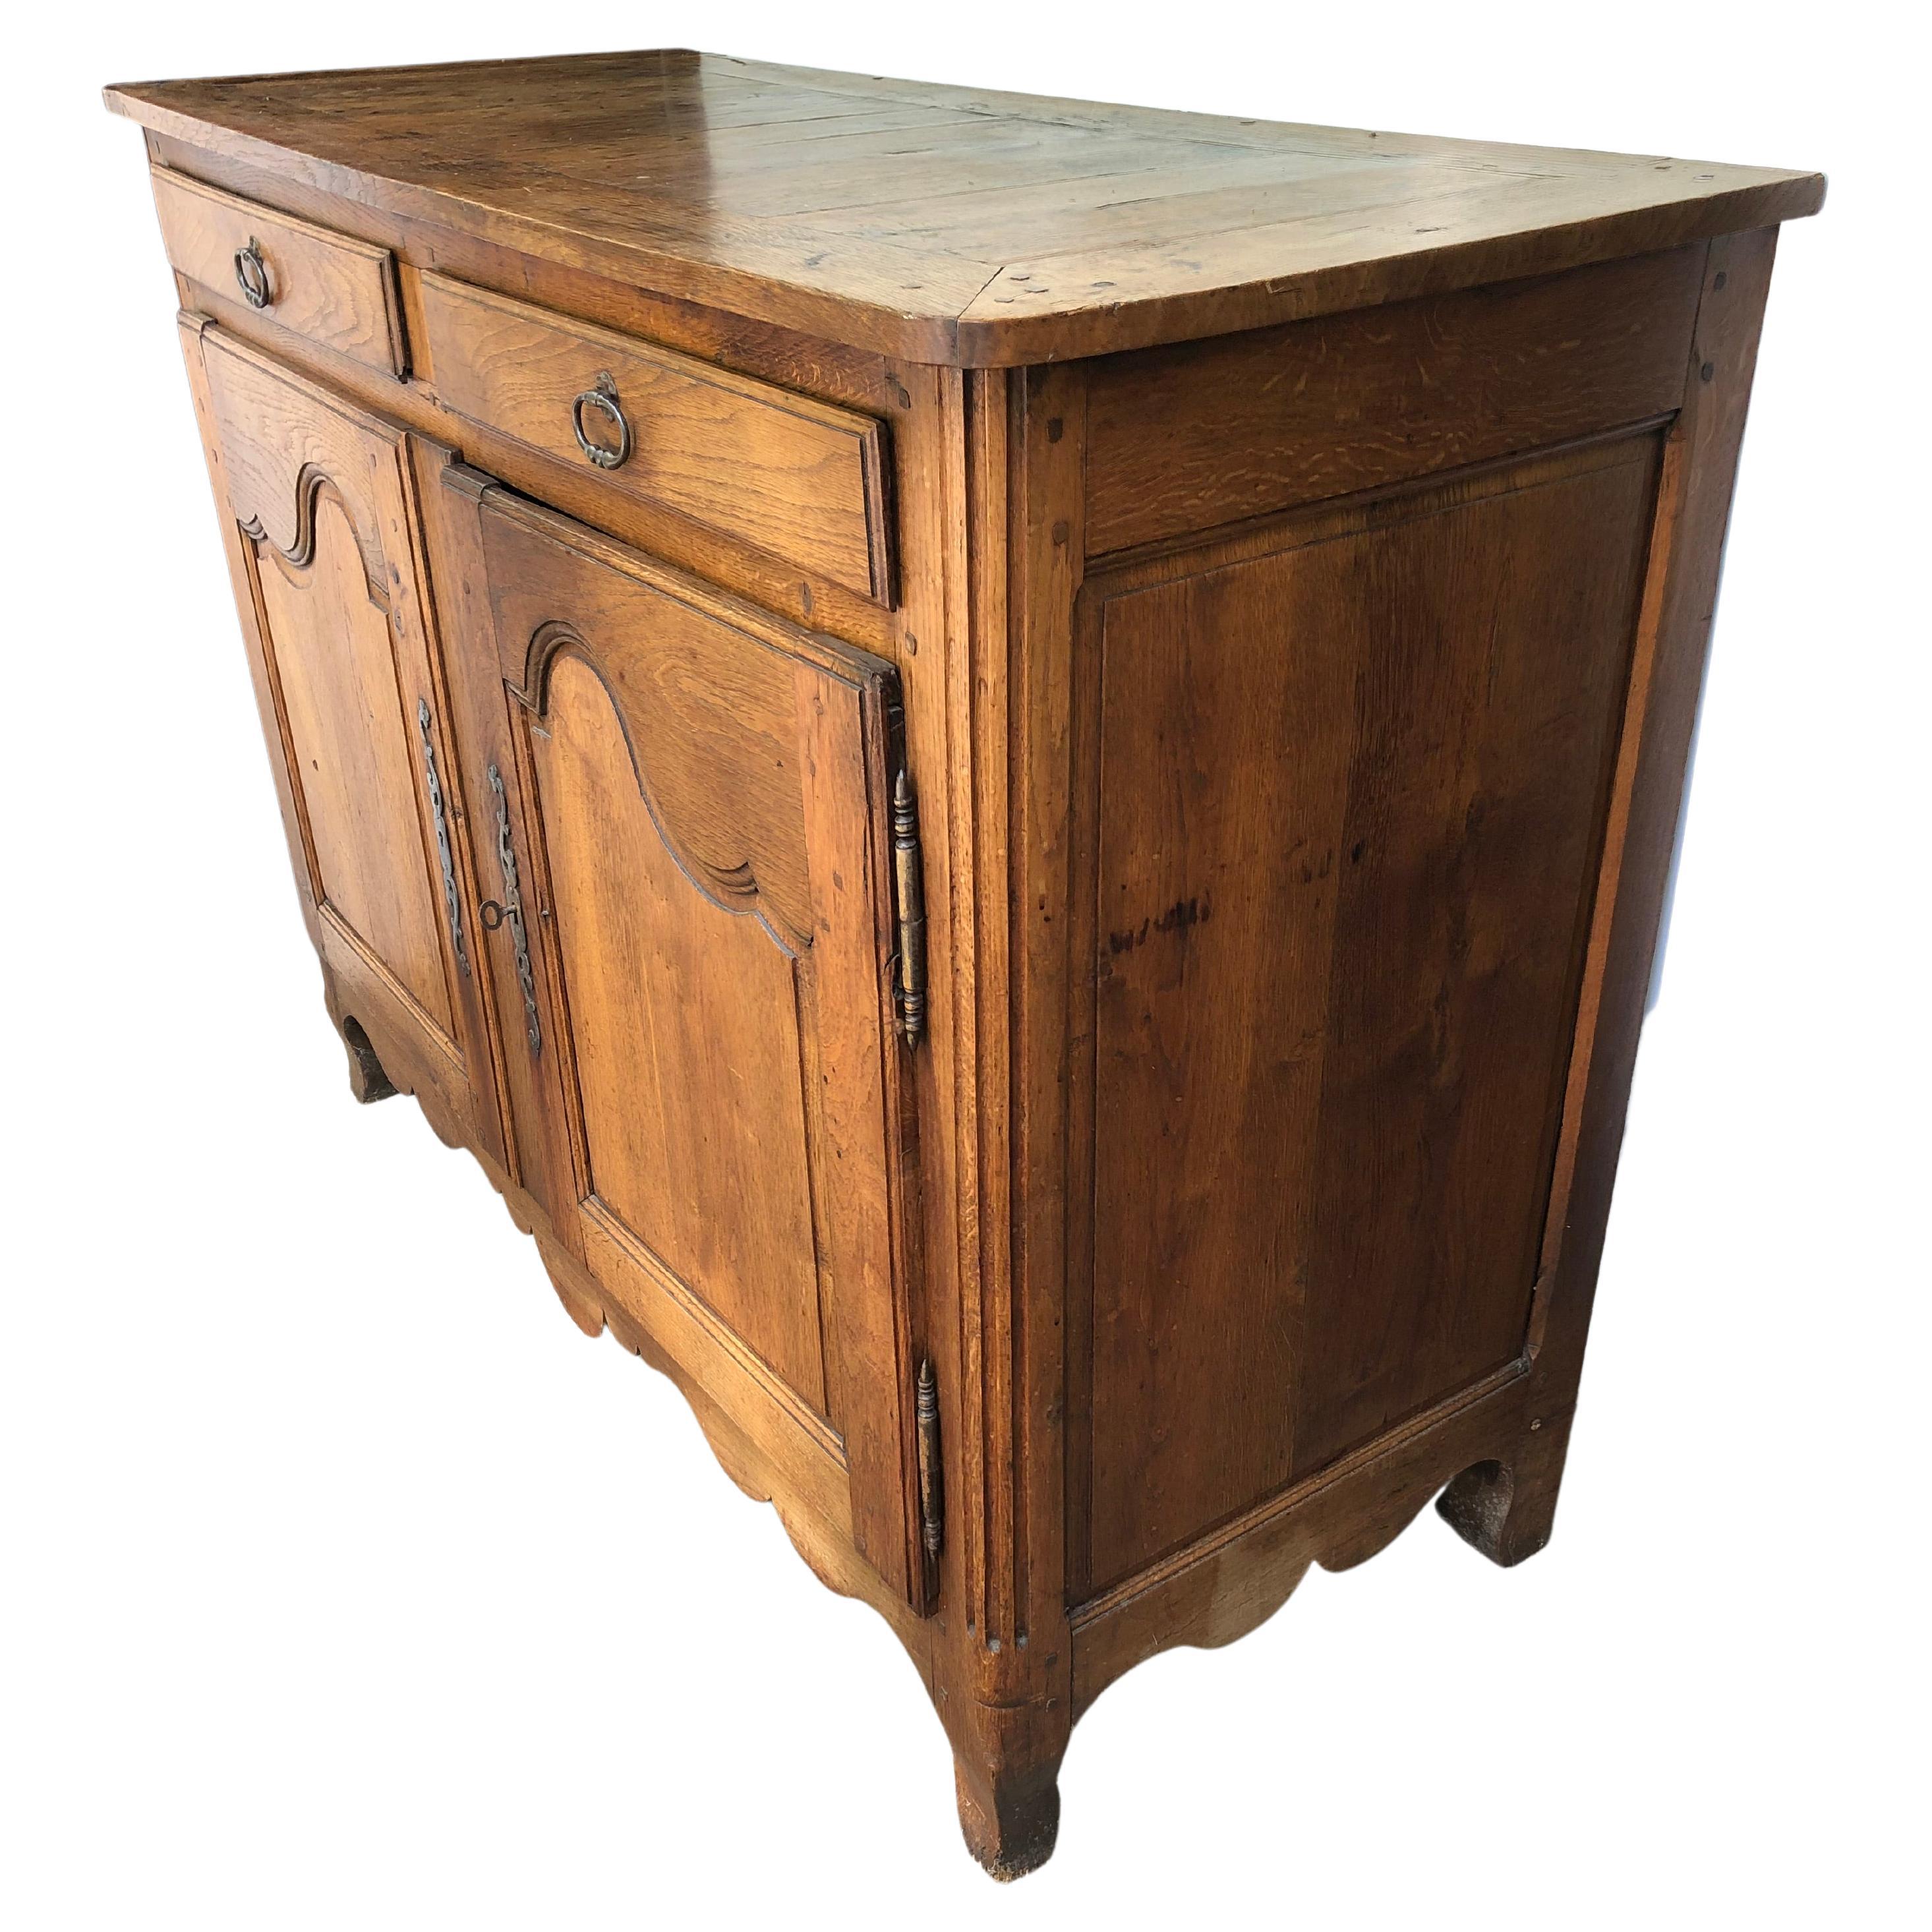 Rustic French Country oak sideboard or buffet having carved paneled two door front with two drawers above. Original hardware and wonderful aged slightly distressed patina. We love the wooden nailheads that are visible on top. Great storage inside